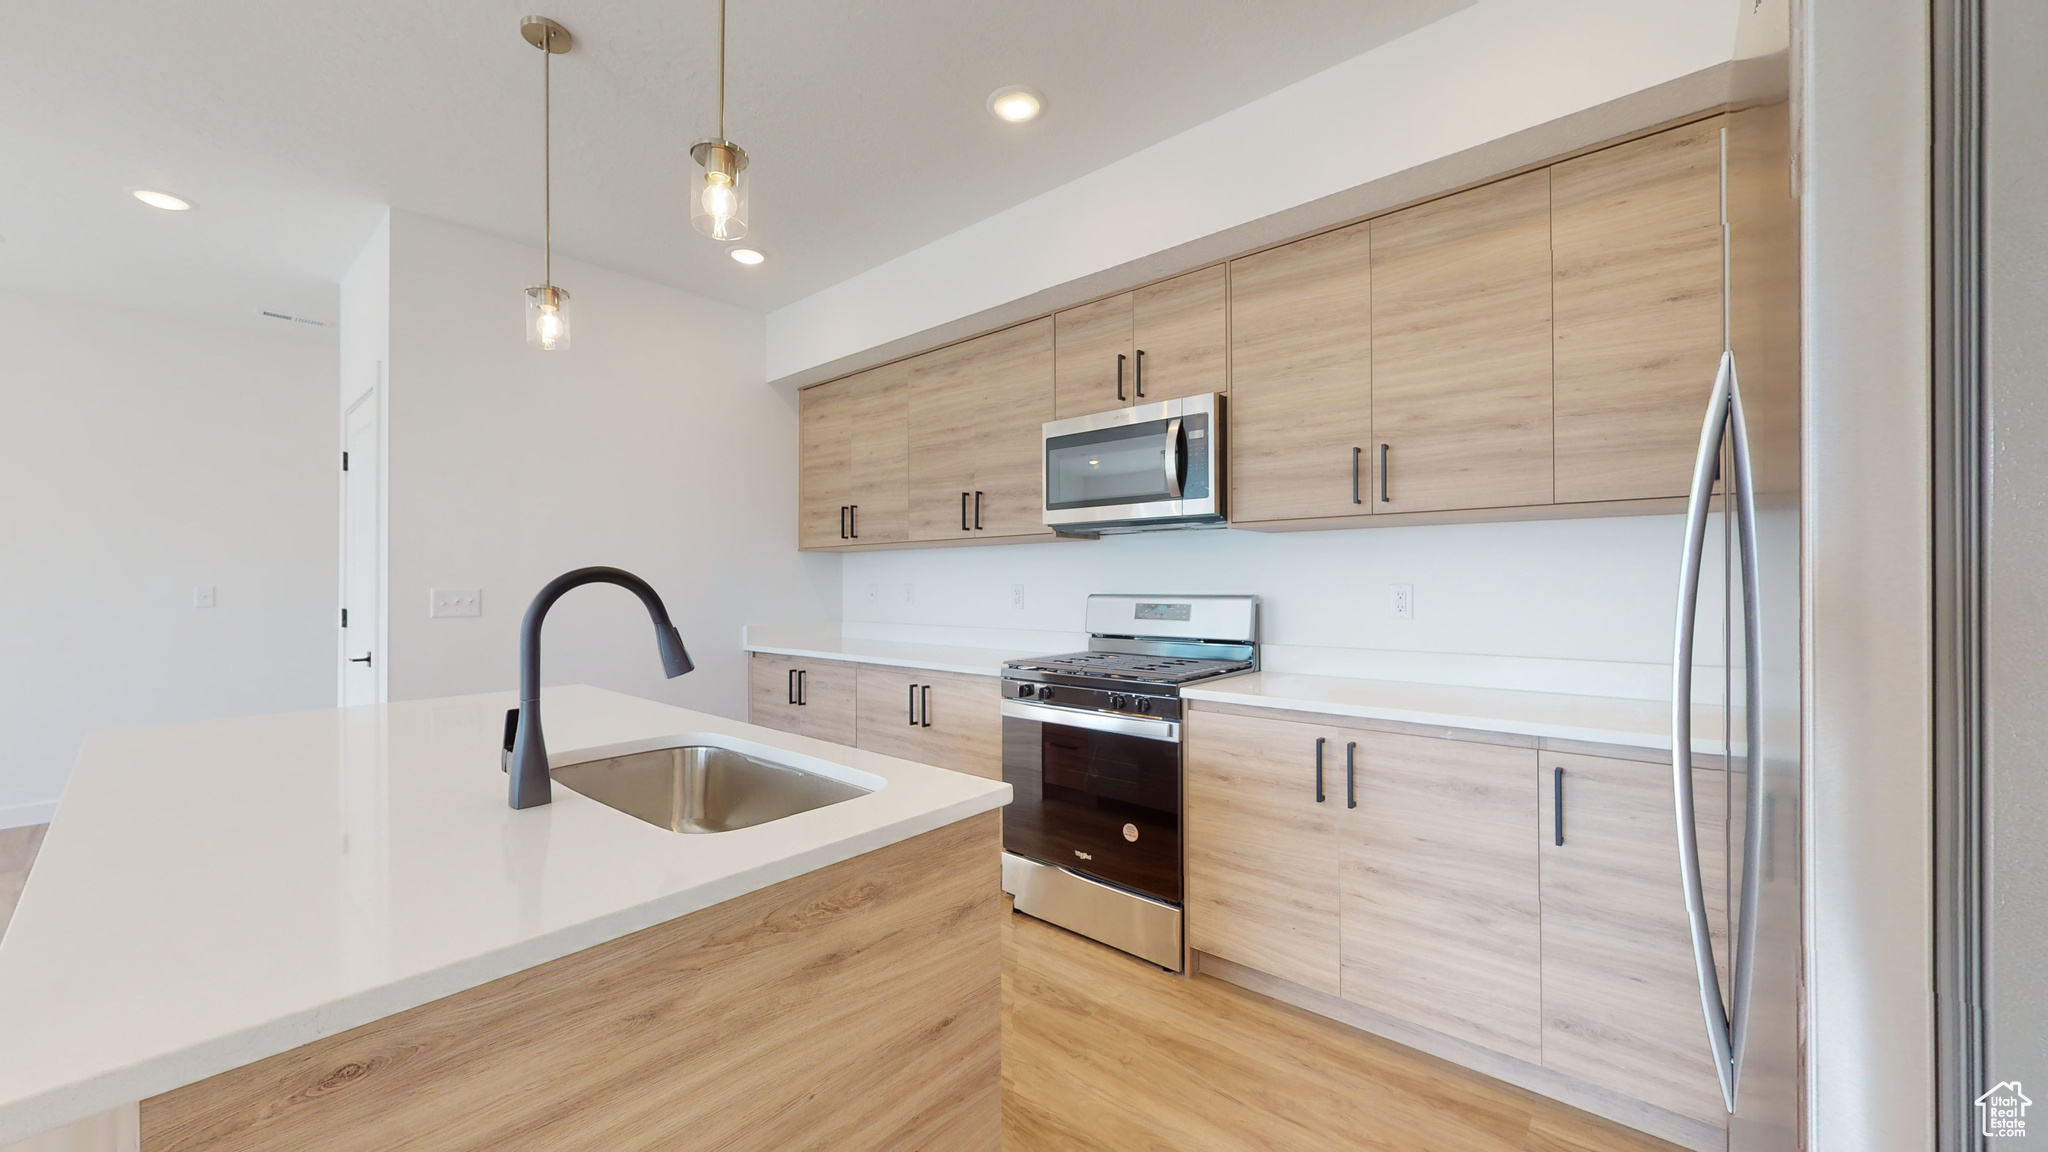 Kitchen featuring light brown cabinets, a kitchen island with sink, appliances with stainless steel finishes, decorative light fixtures, and sink